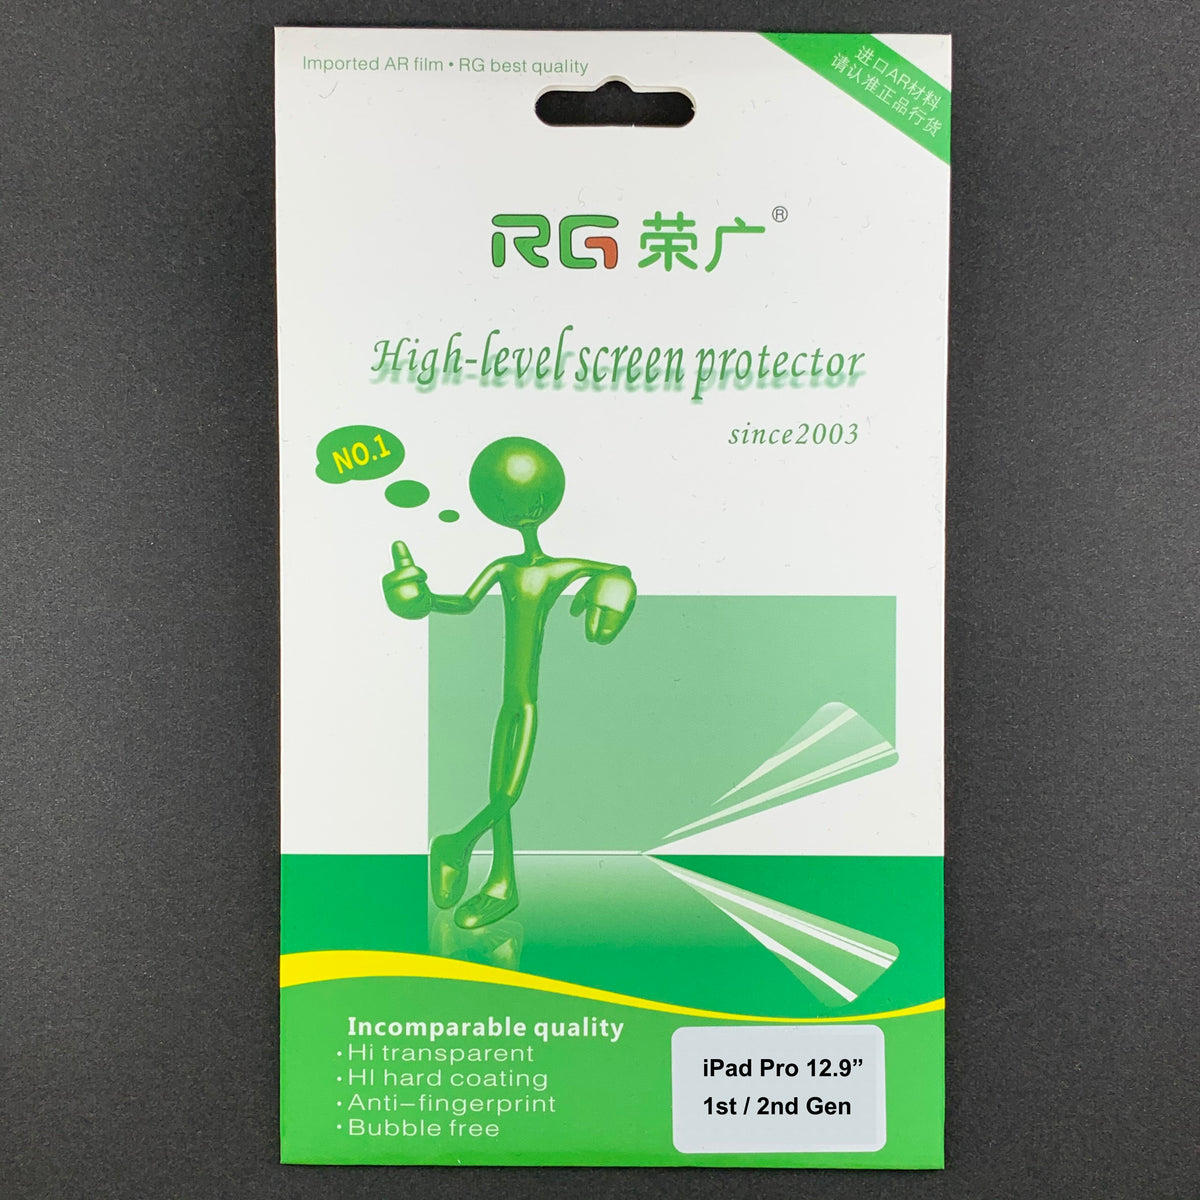 RG Professional Soft Film Screen Protector for iPad Pro 12.9&quot; 1st / 2nd Gen (CLEAR, 2-PACK)